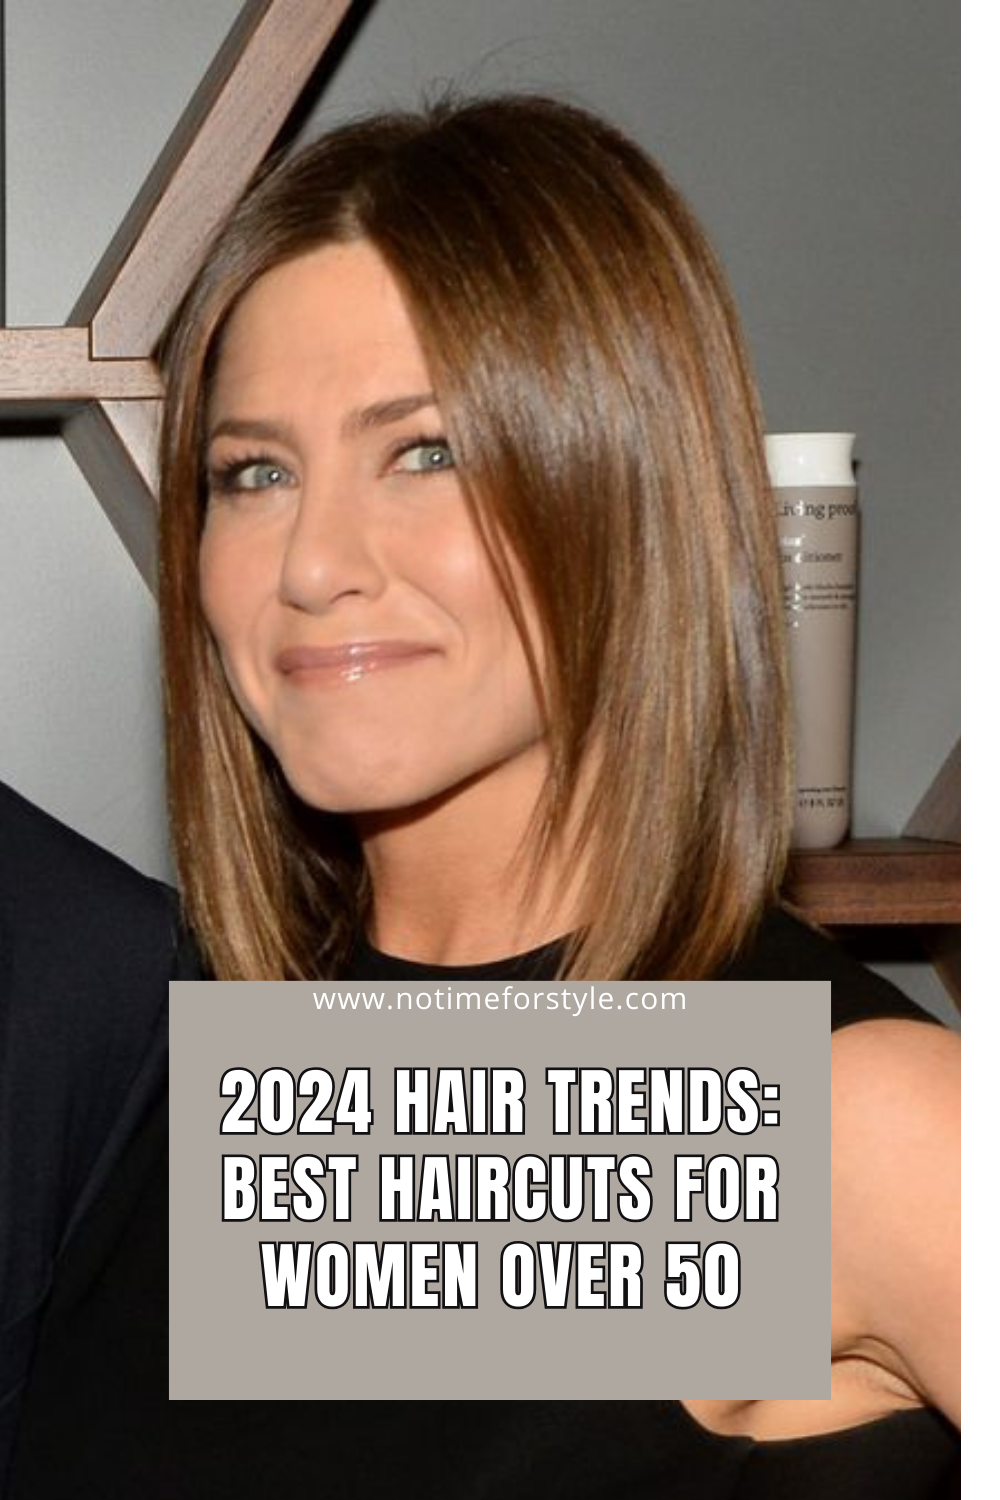 Hair Trends Best Haircuts For Women Over No Time For Style